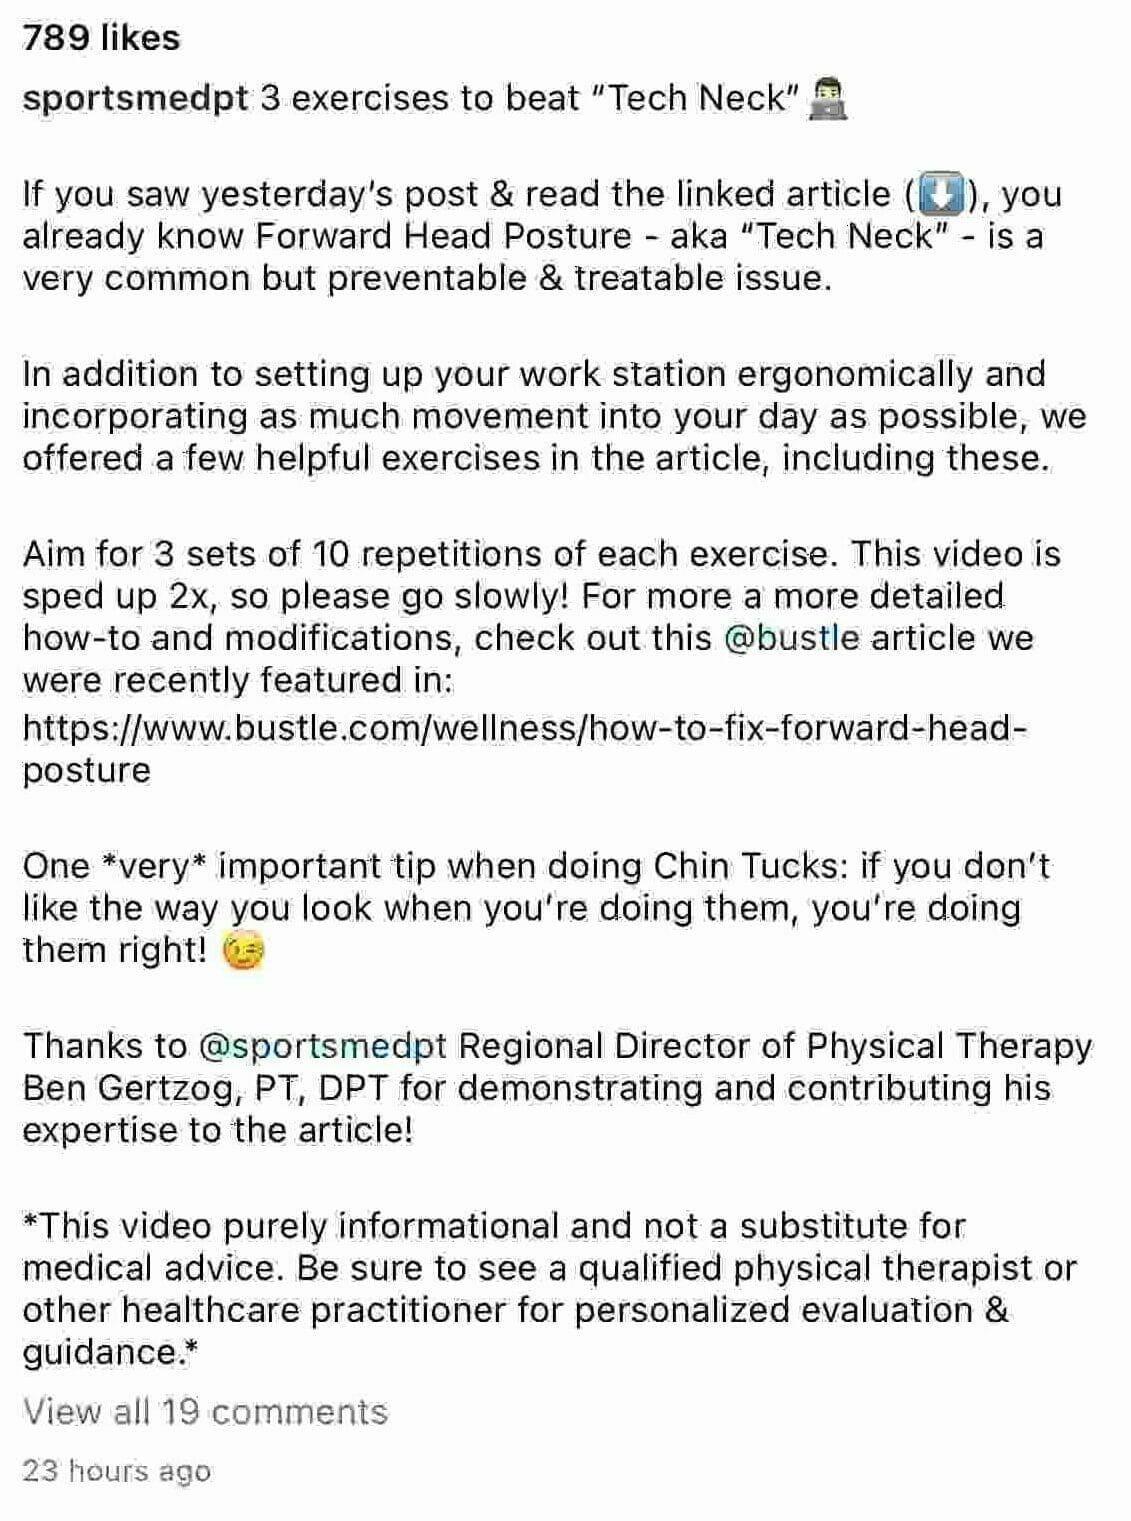 Instagram video marketing ideas for physical therapists 